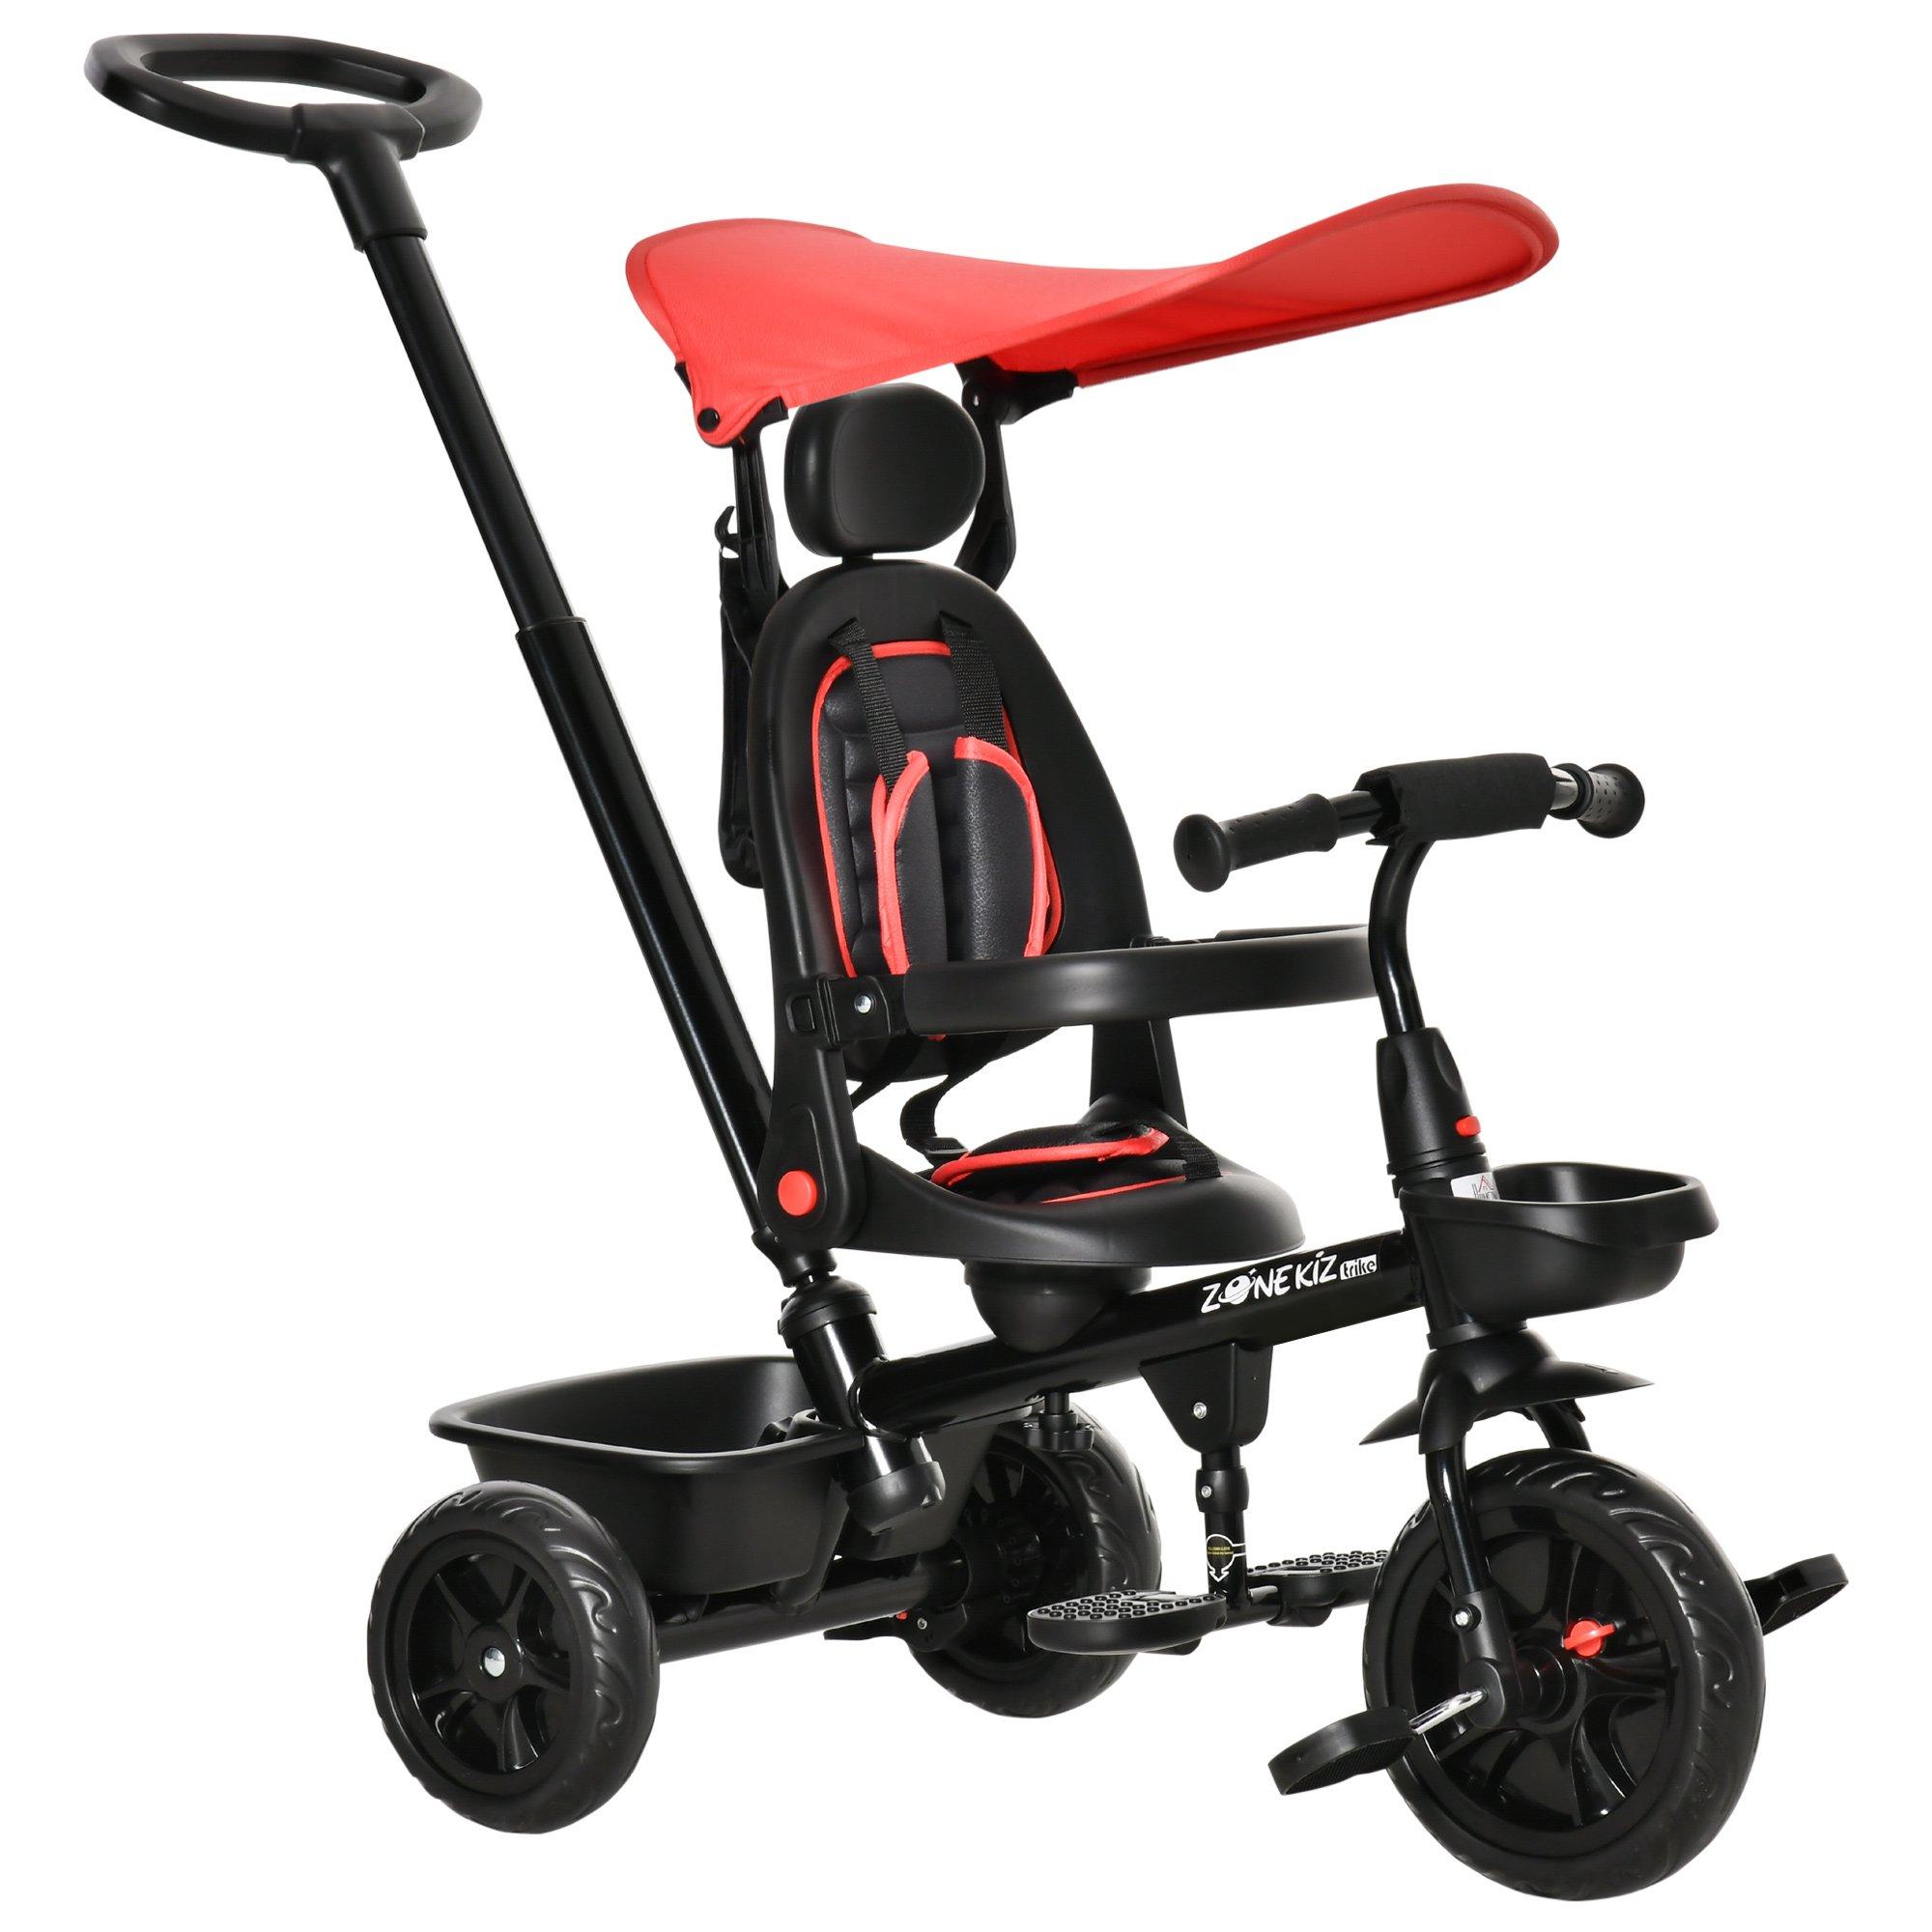 Homcom 4 In 1 Tricycle Multicolore